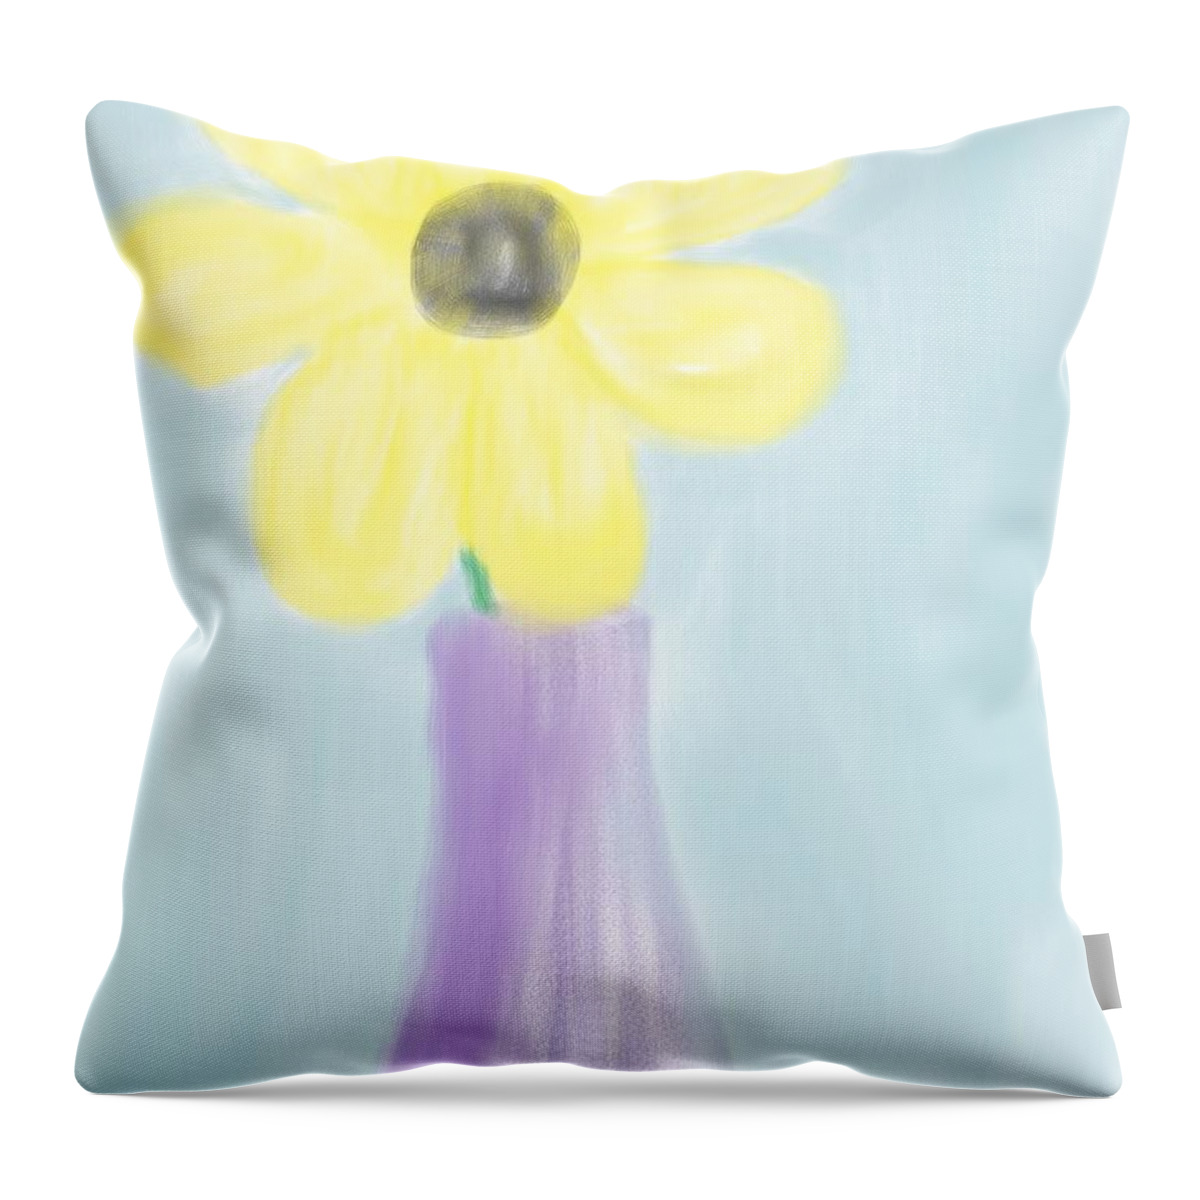 Flower Throw Pillow featuring the digital art A Flower For Mo by Heidi Smith